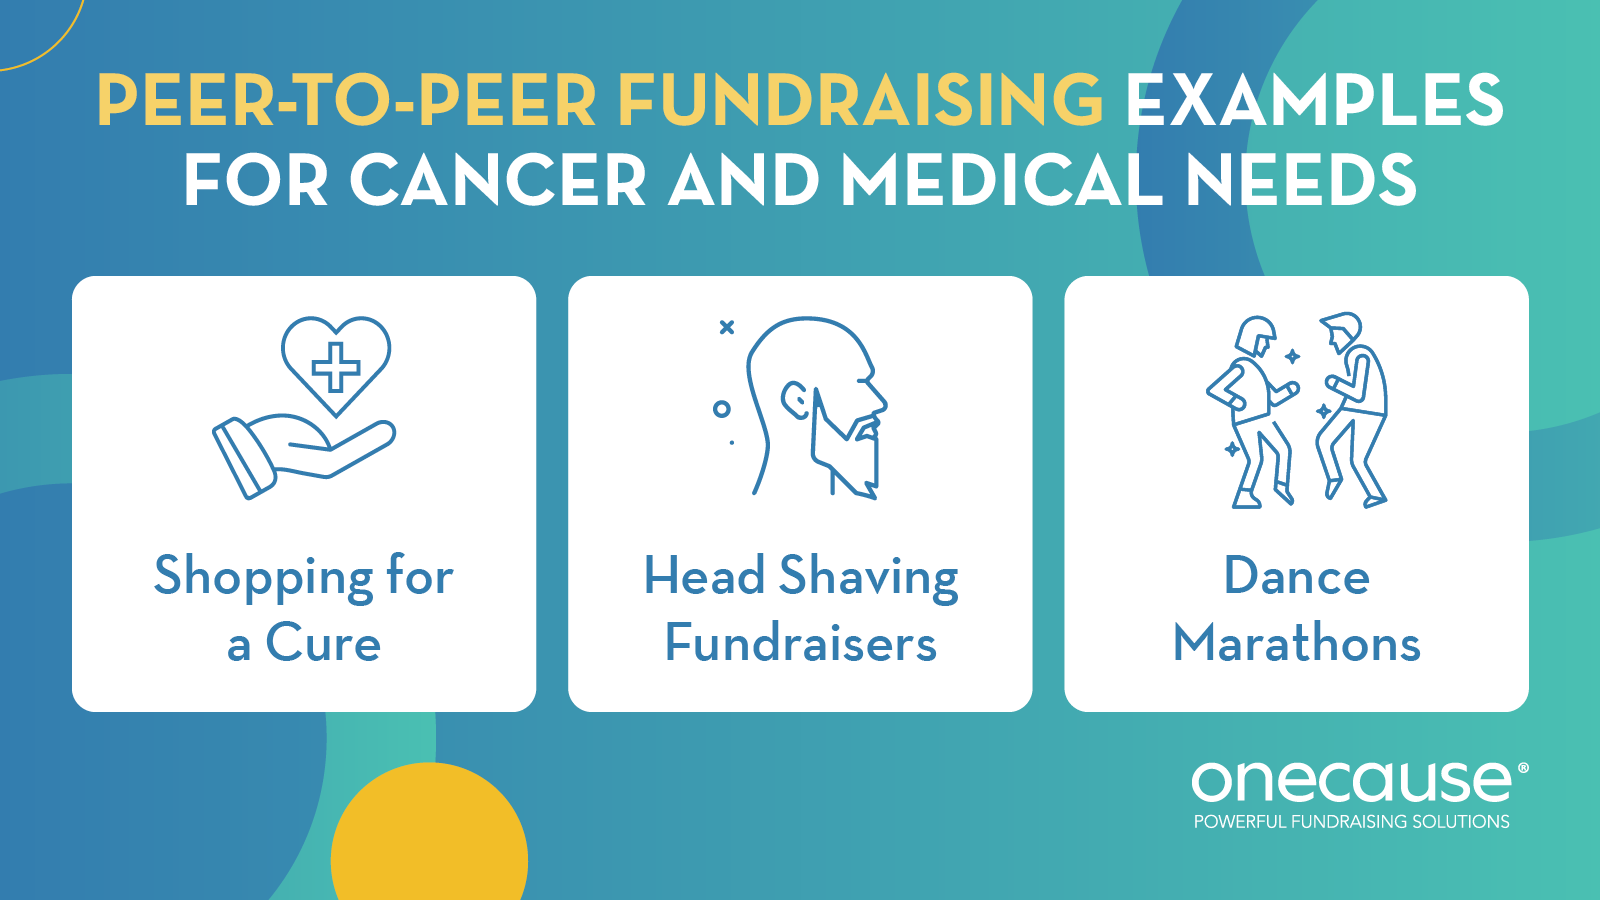 This image lists the peer-to-peer fundraising ideas for cancer and medical needs, also covered in the text below.